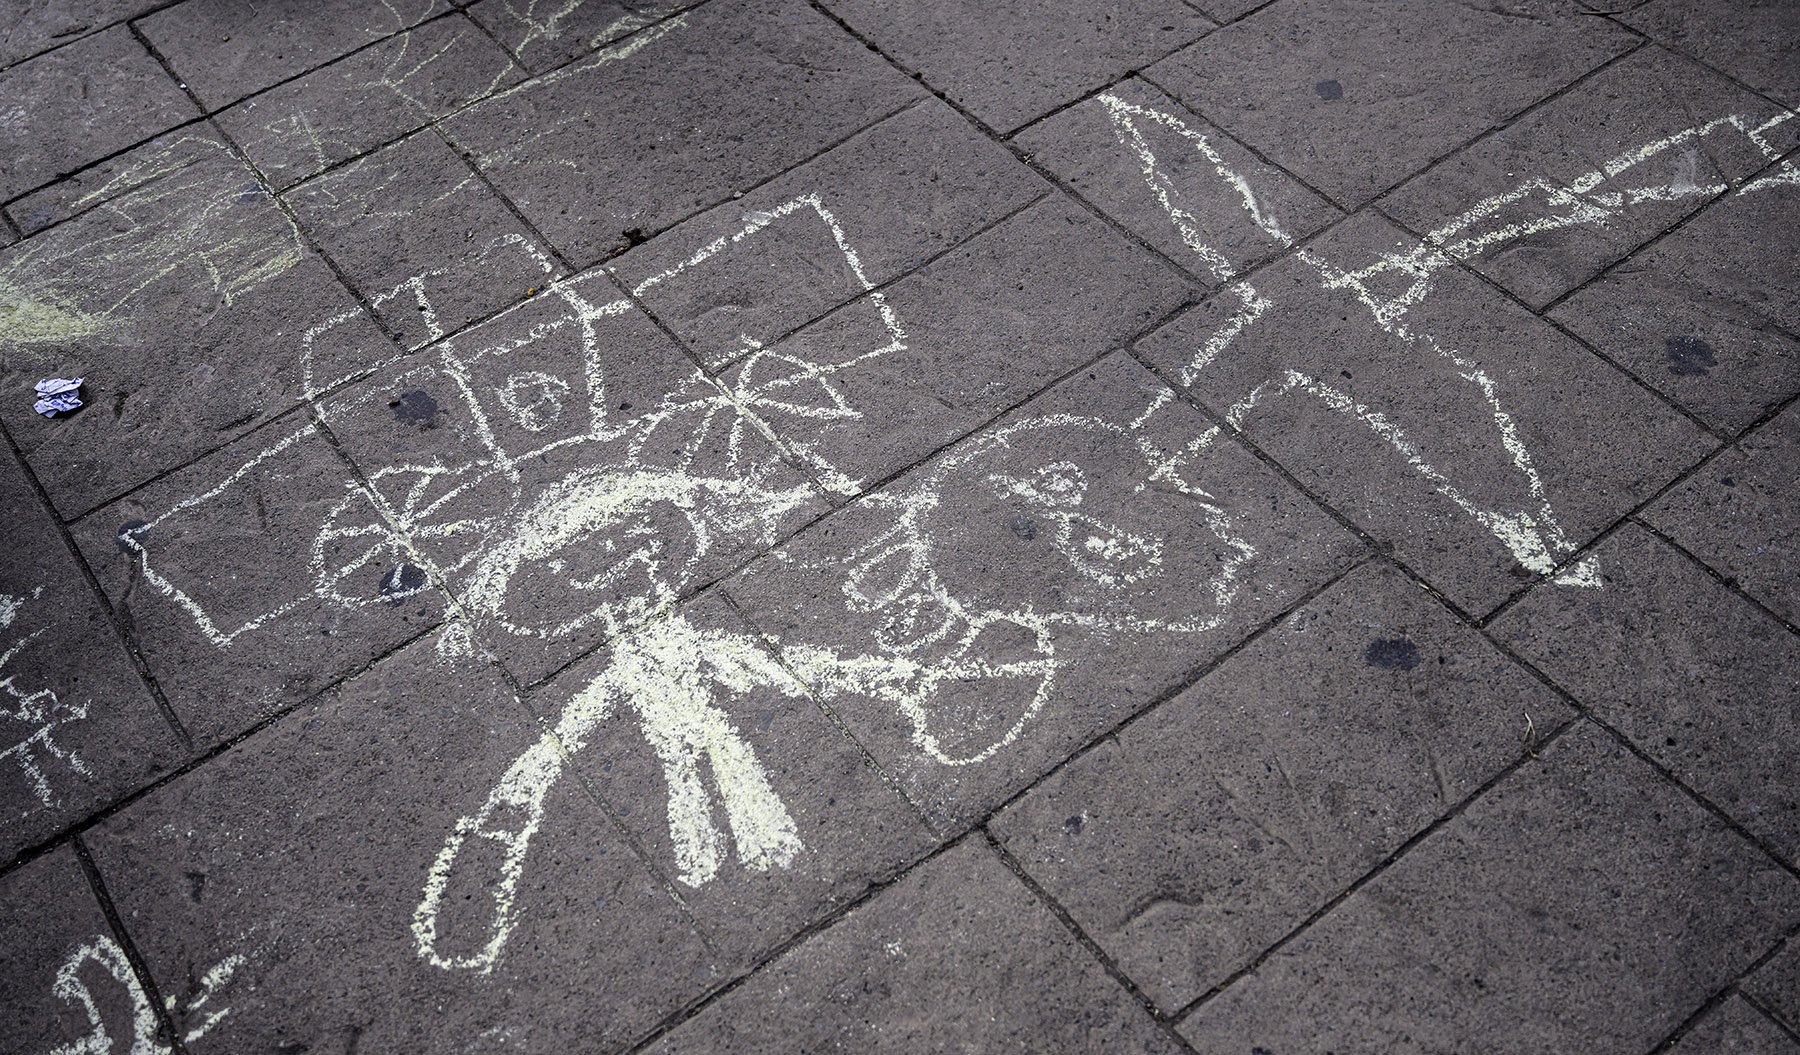  Ukrainian children waiting in Tijuana with their families while seeking asylum in the U.S., are given chalk by volunteers to help occupy the hours-long wait on Wednesday, March 30, 2022.  